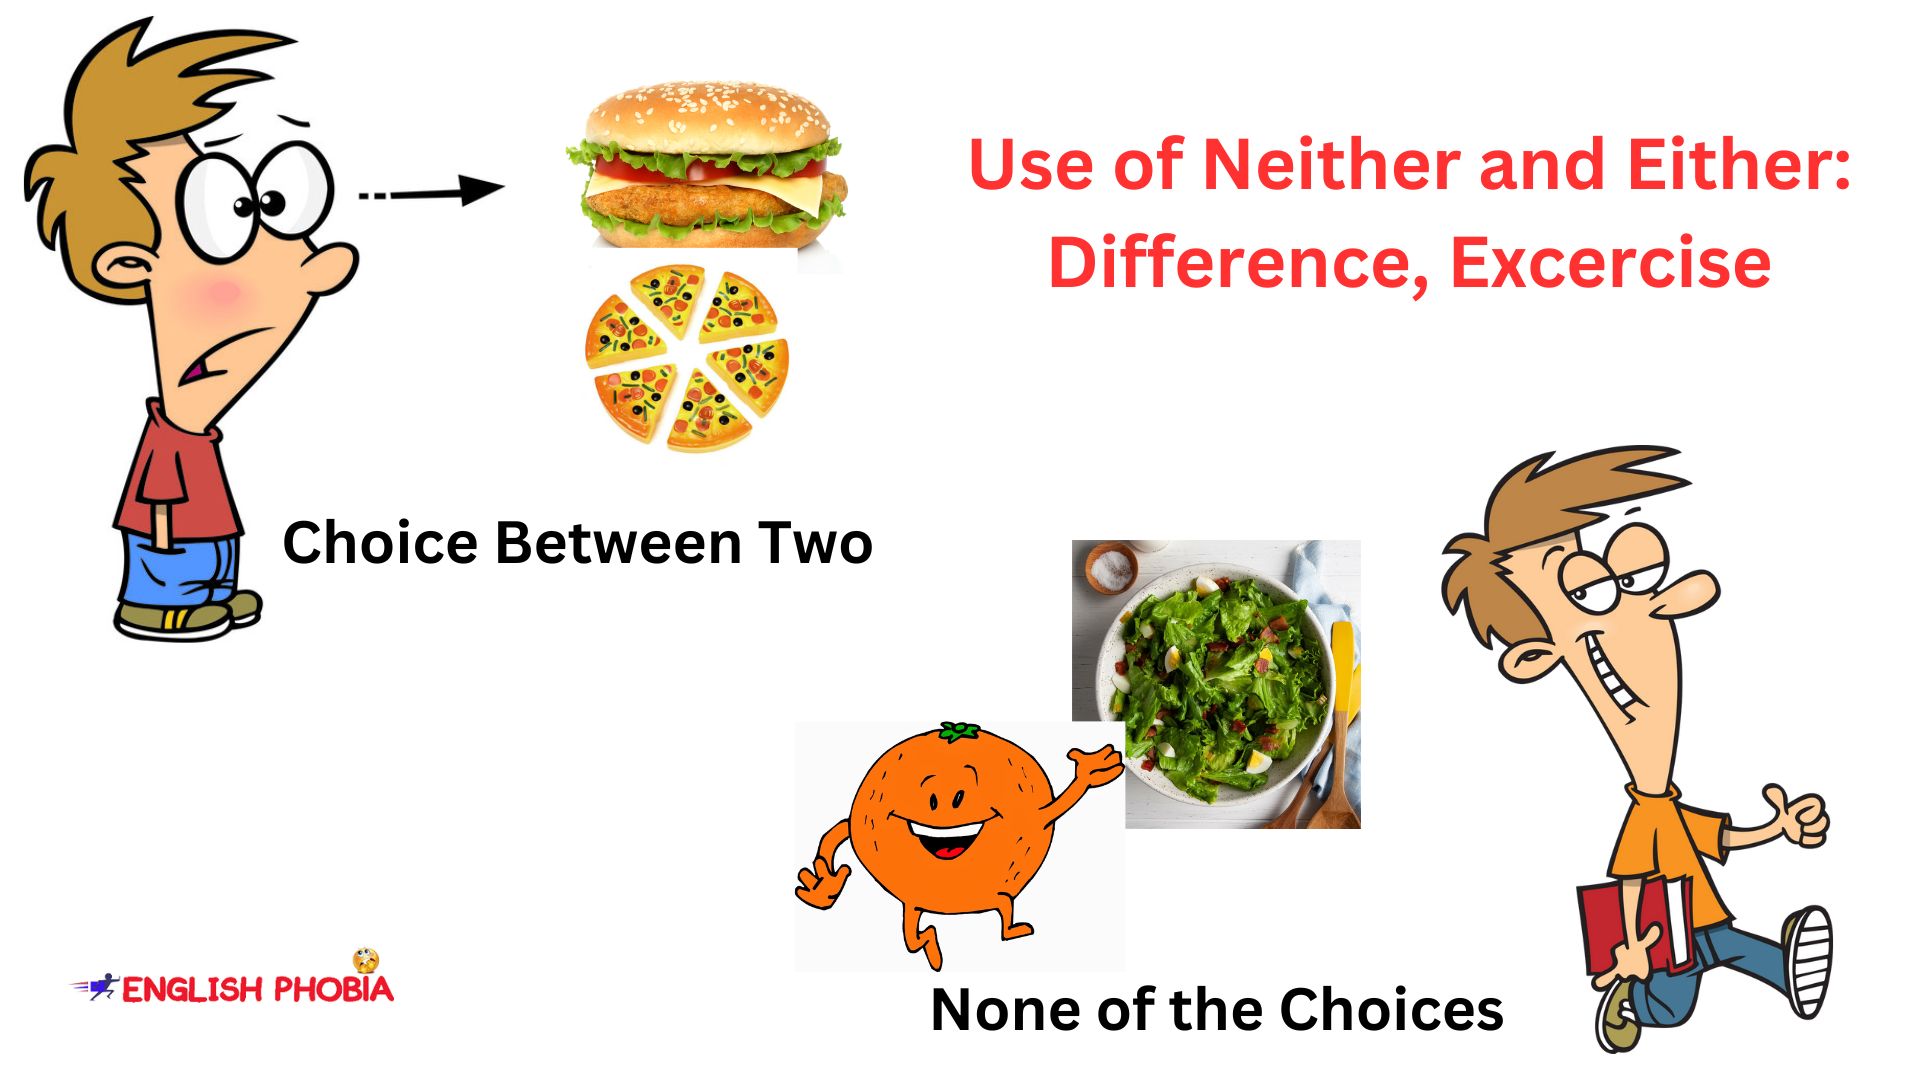 Use of Neither and Either